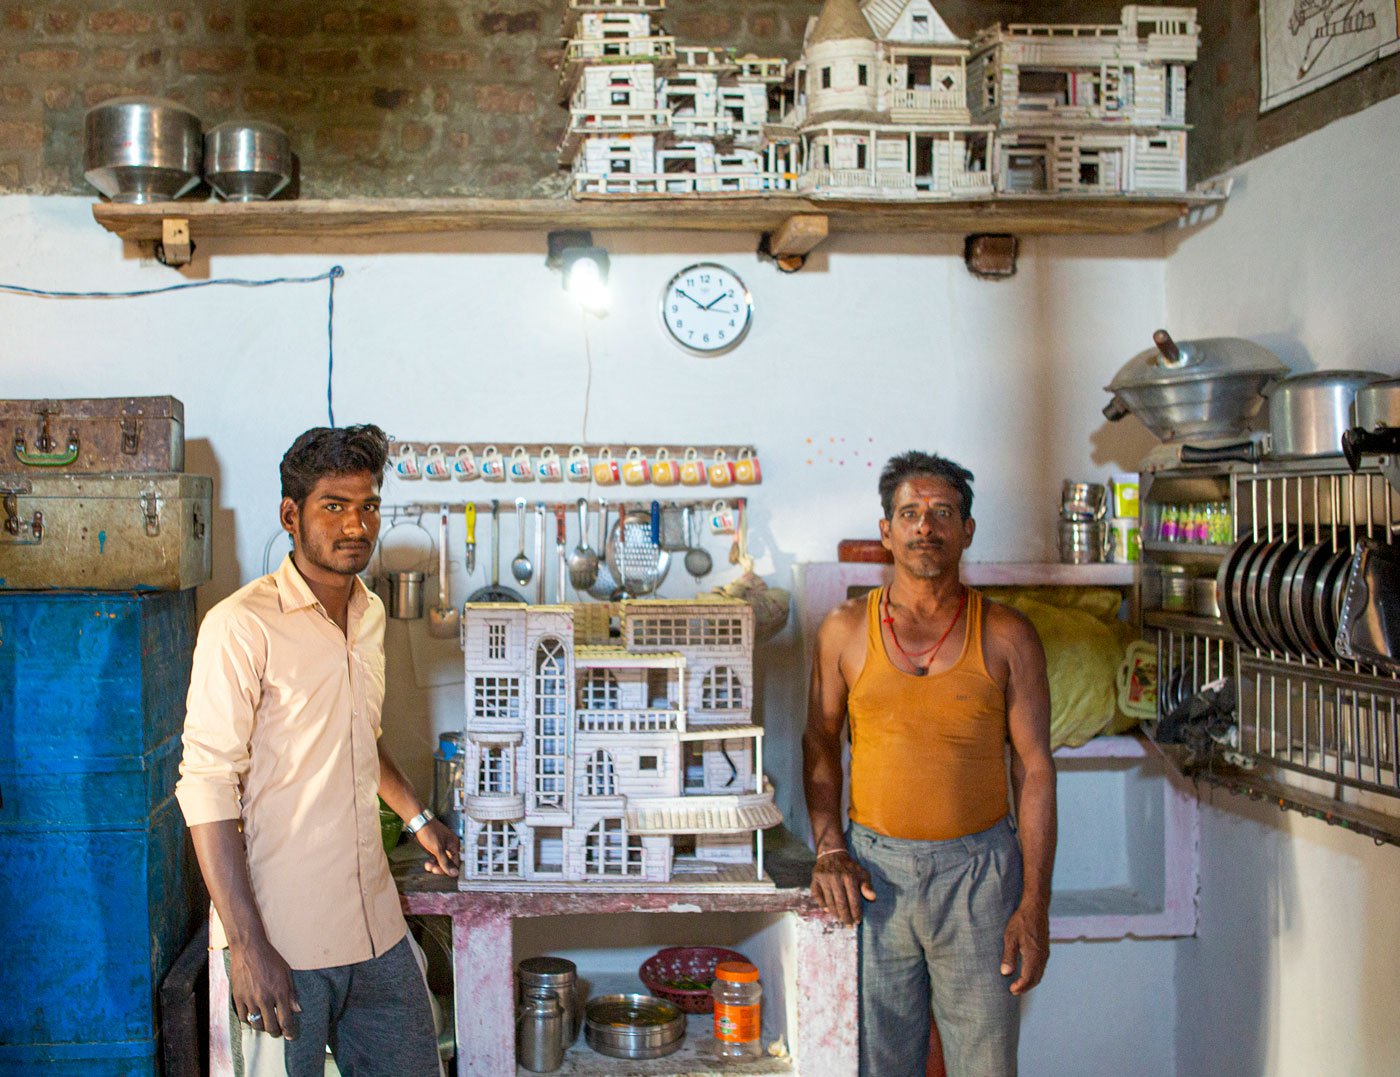 Jaypal with one of his paper creations; he also designs doors made by father Dilawar Chouhan (right), who works as a carpenter